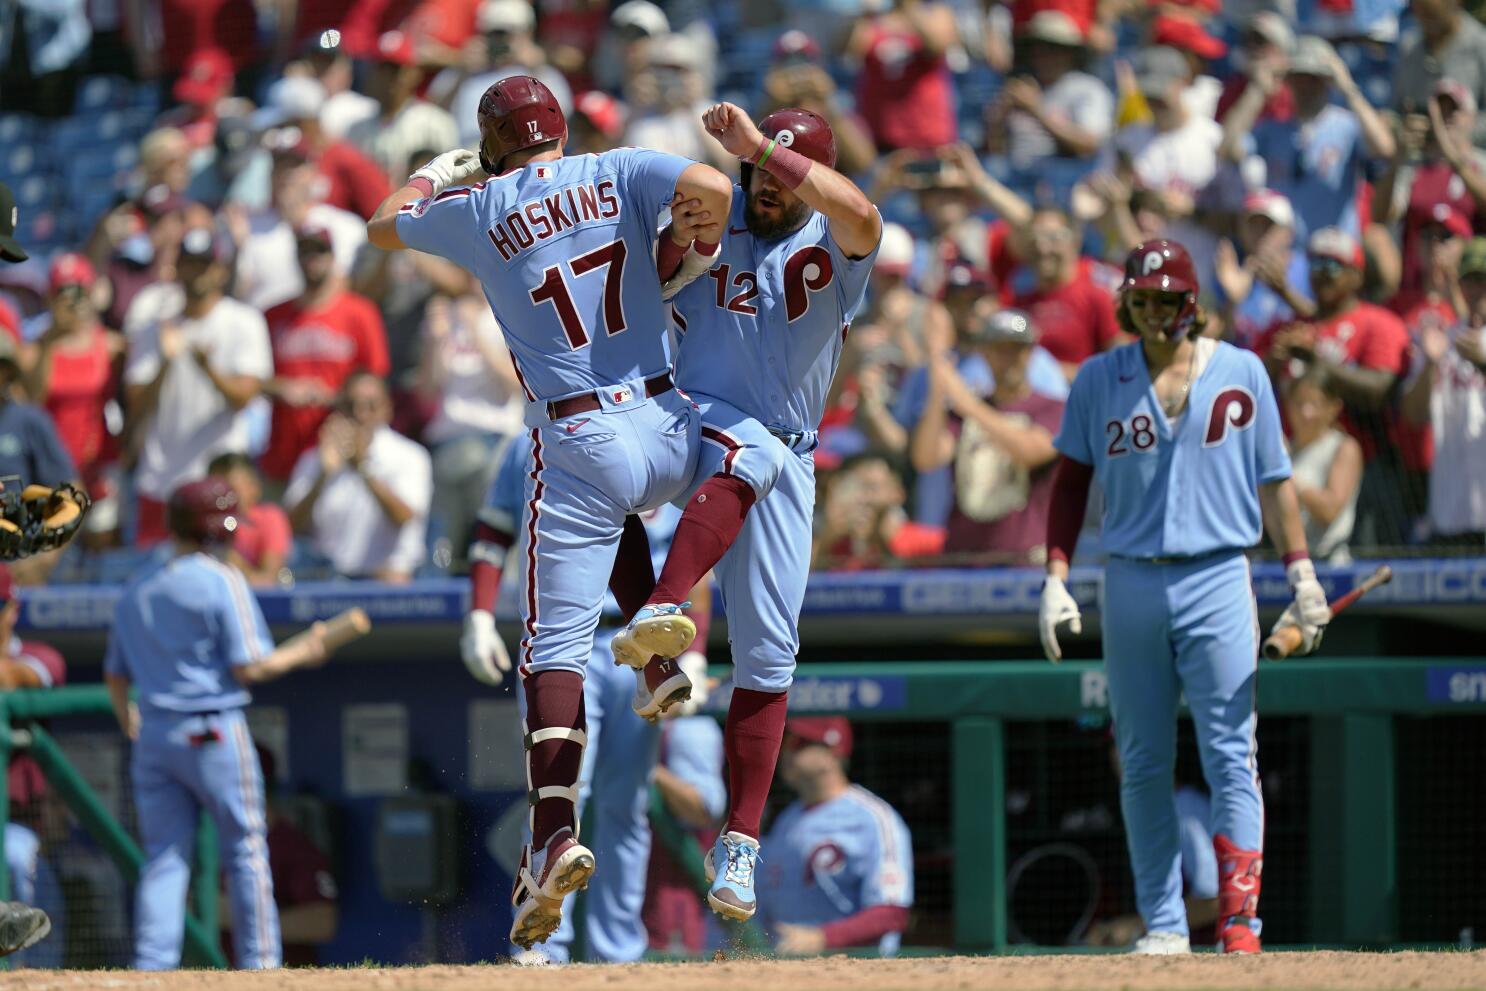 Look on the bright side: Phillies still playing in November with